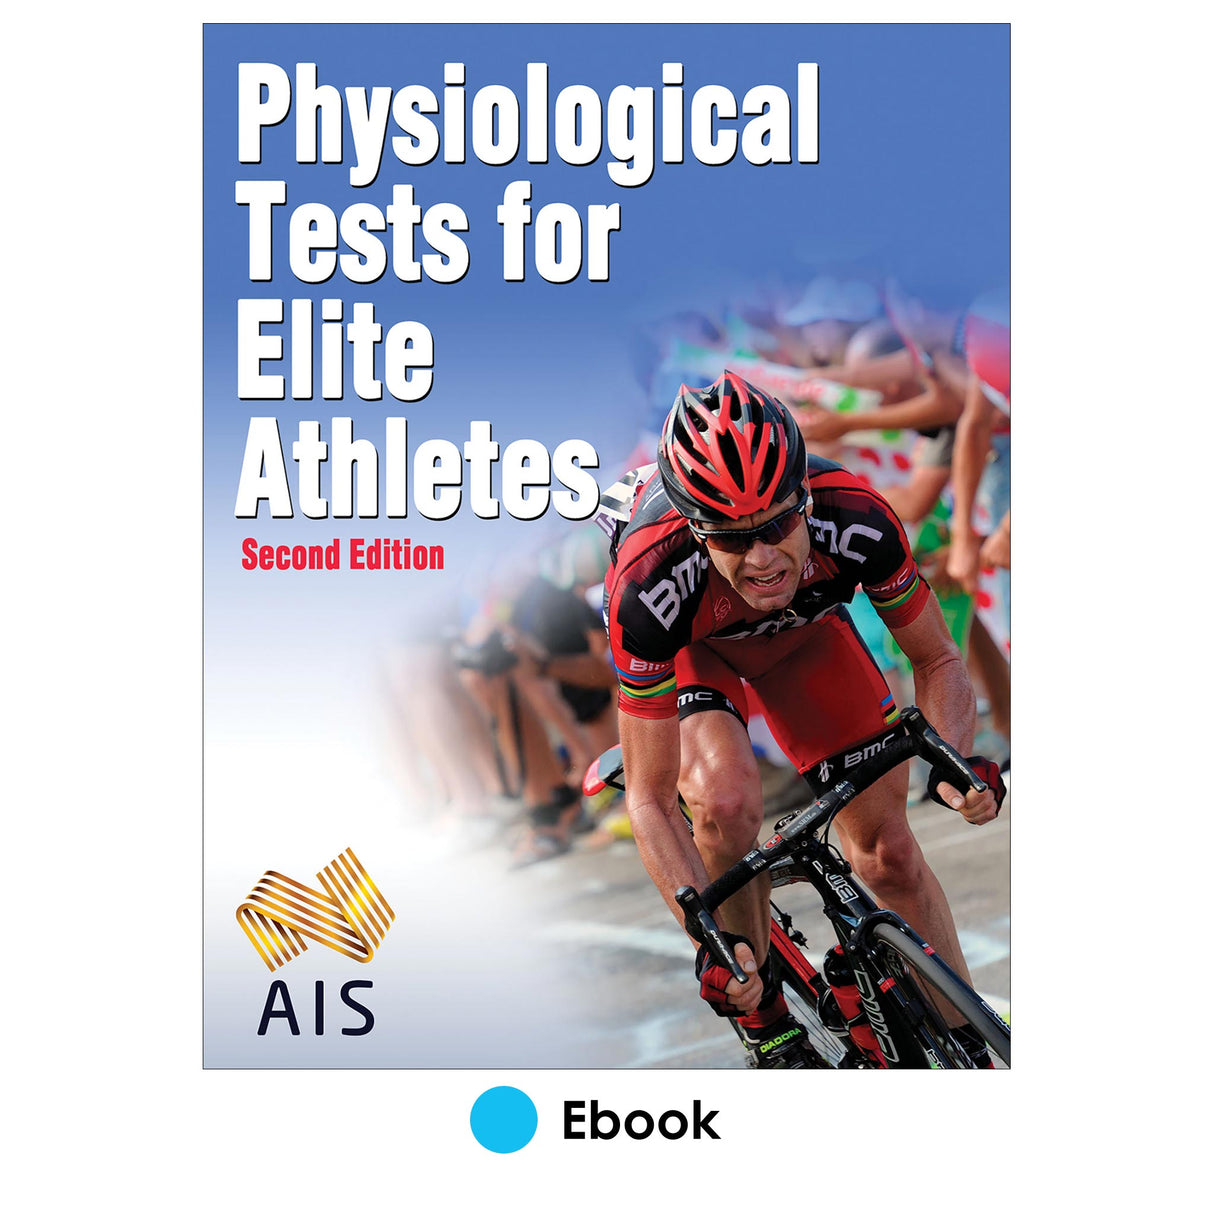 Physiological Tests for Elite Athletes 2nd Edition PDF